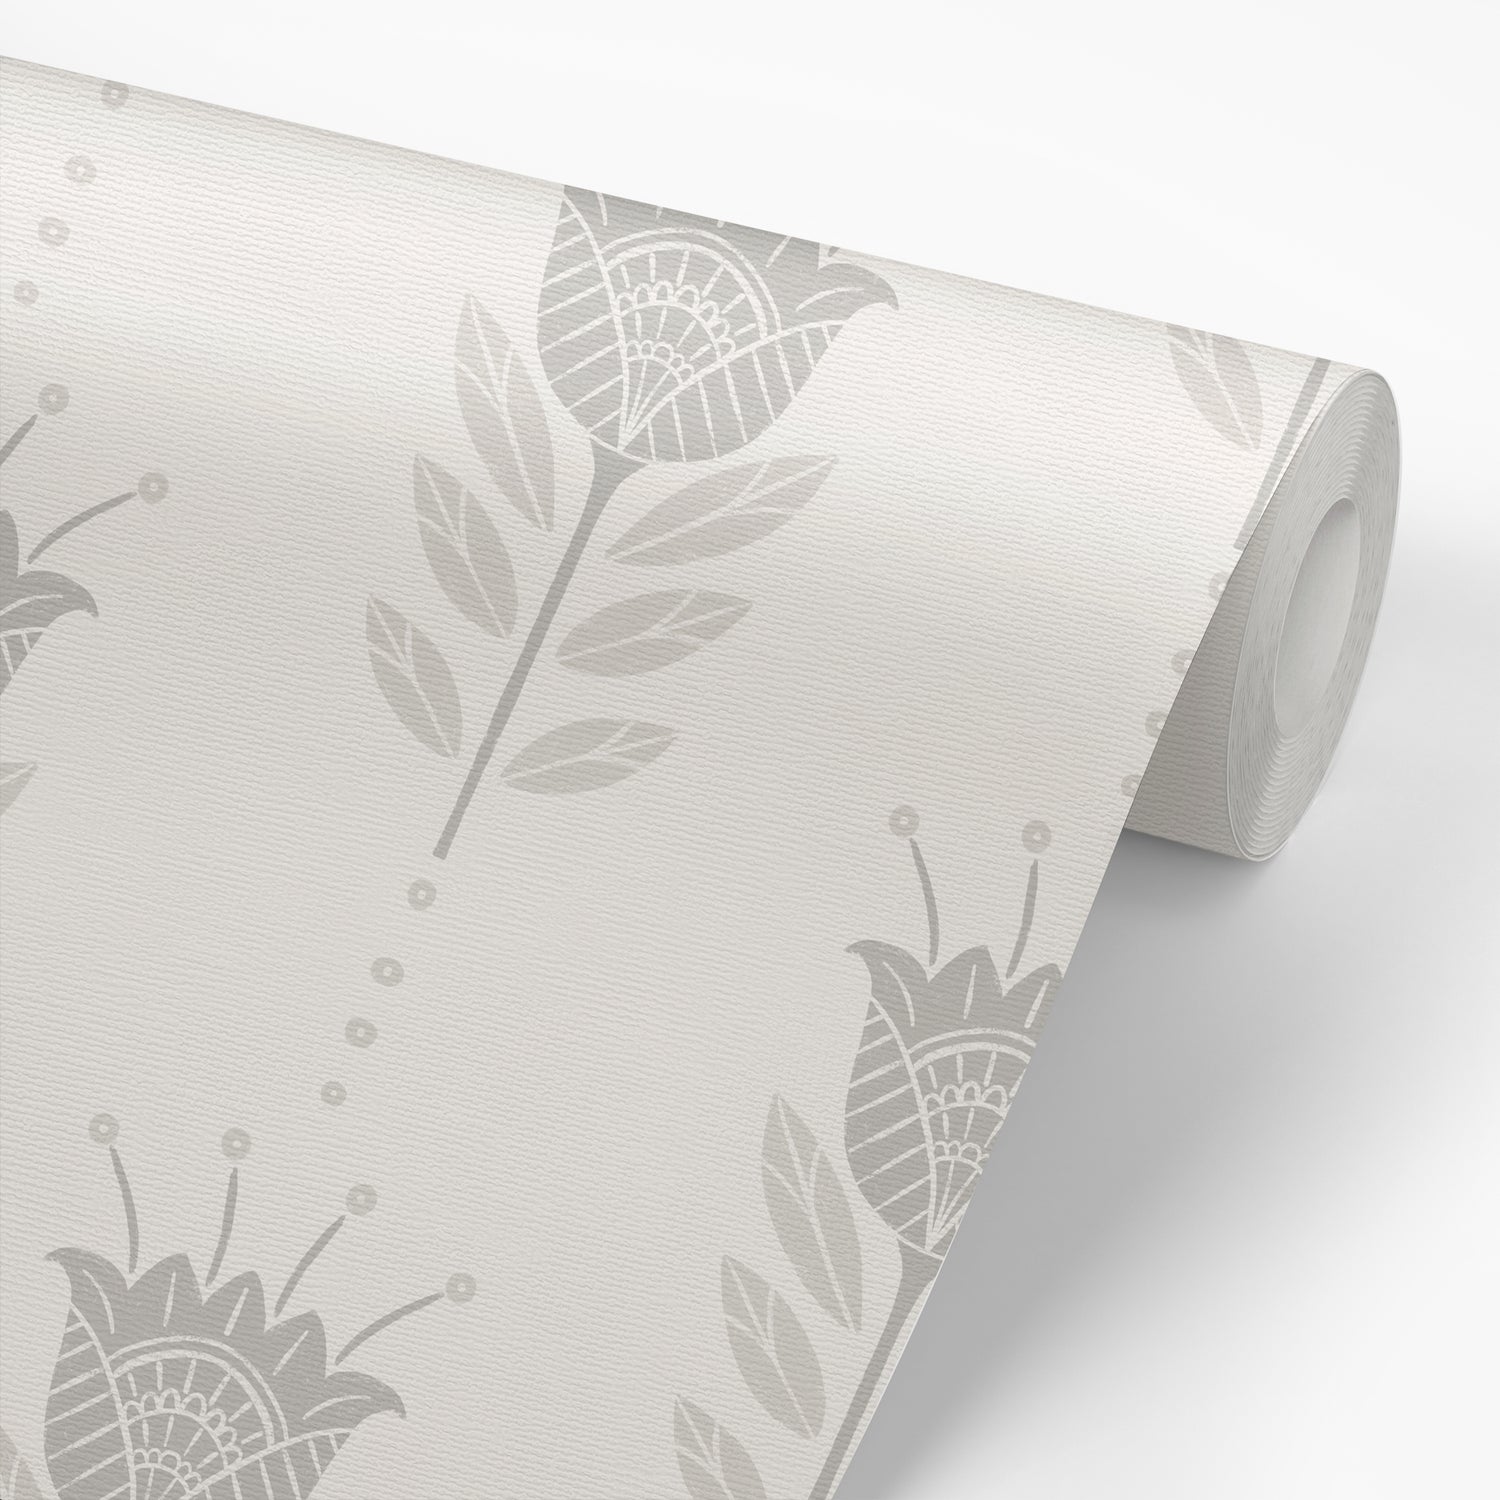 Tulips Wallpaper in Gray shown on a roll of wallpaper.